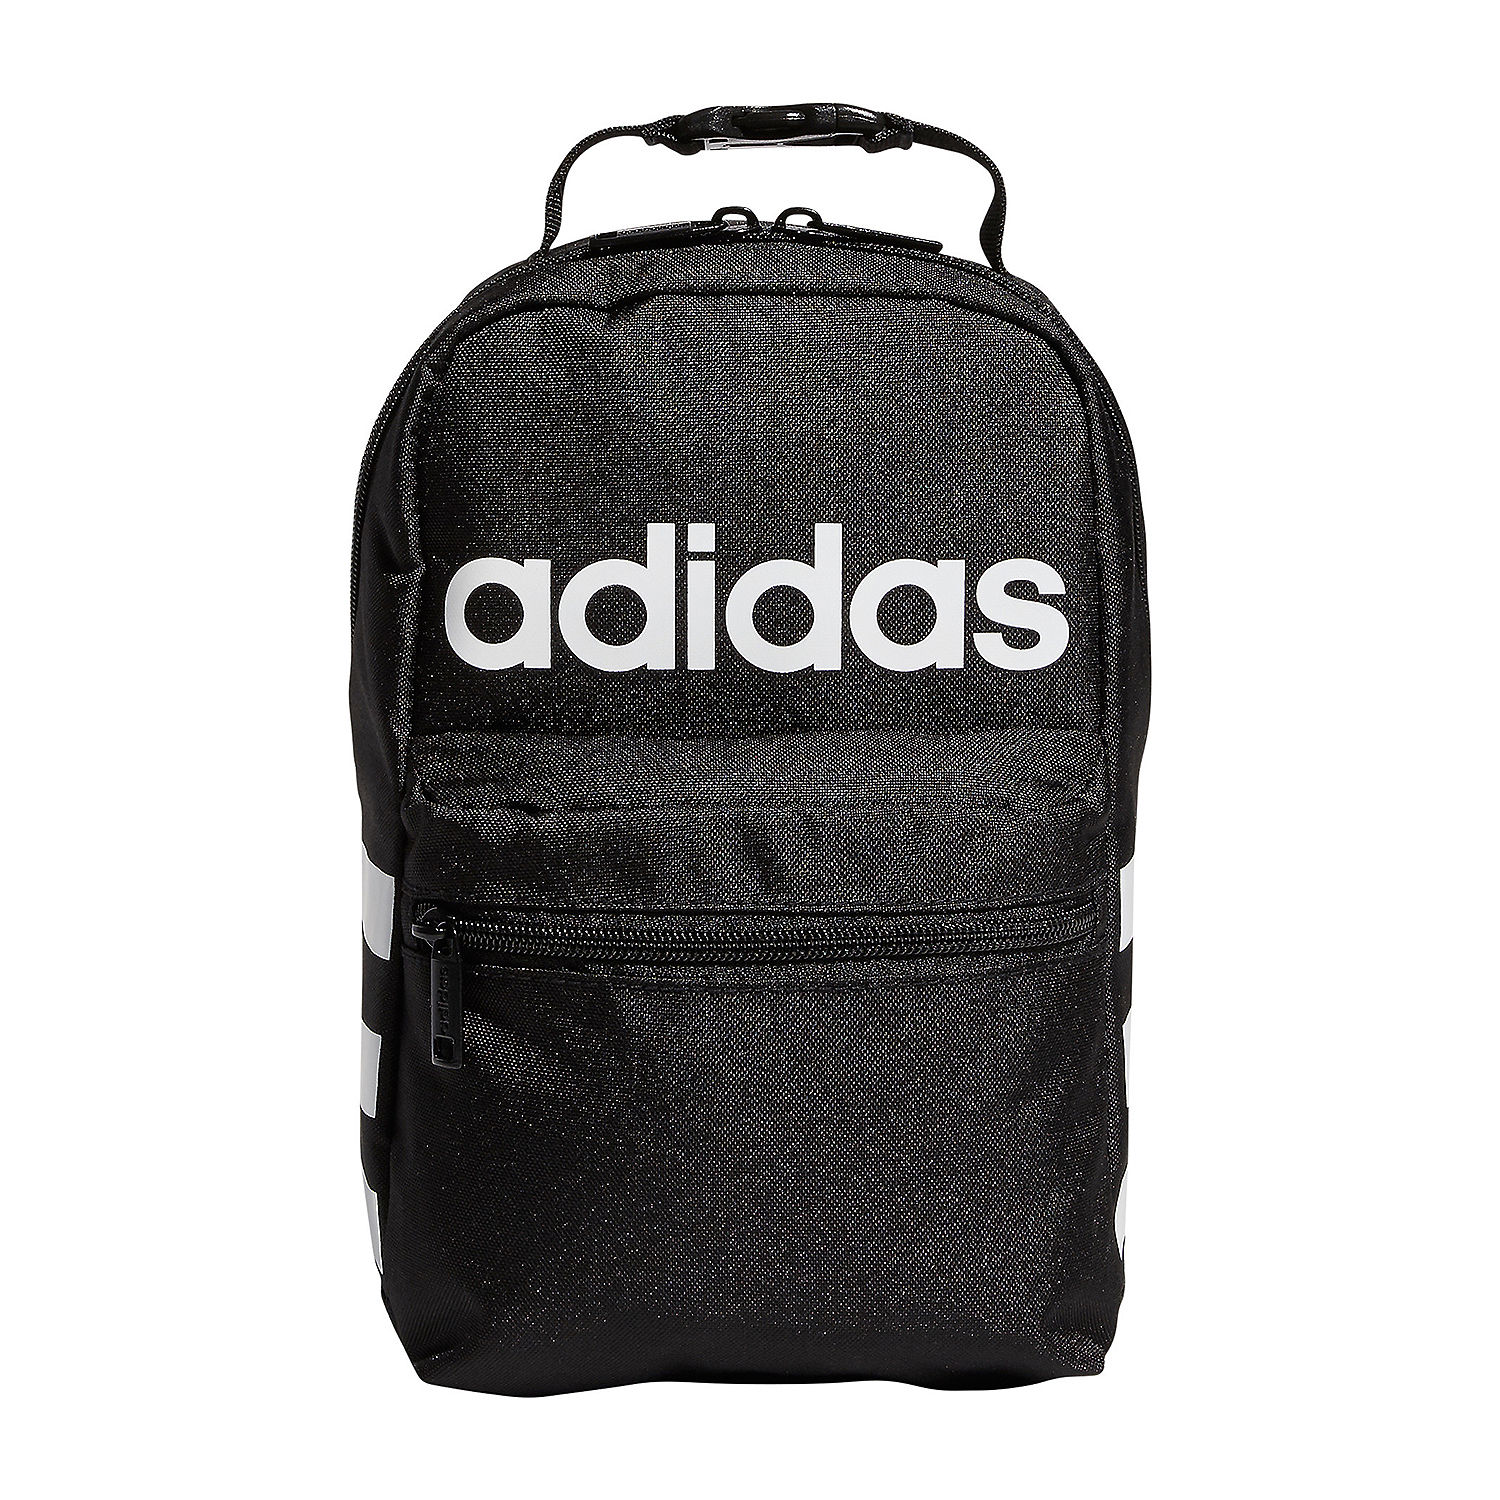 adidas-santiago-2-insulated-lunch-bag-color-black-white-jcpenney